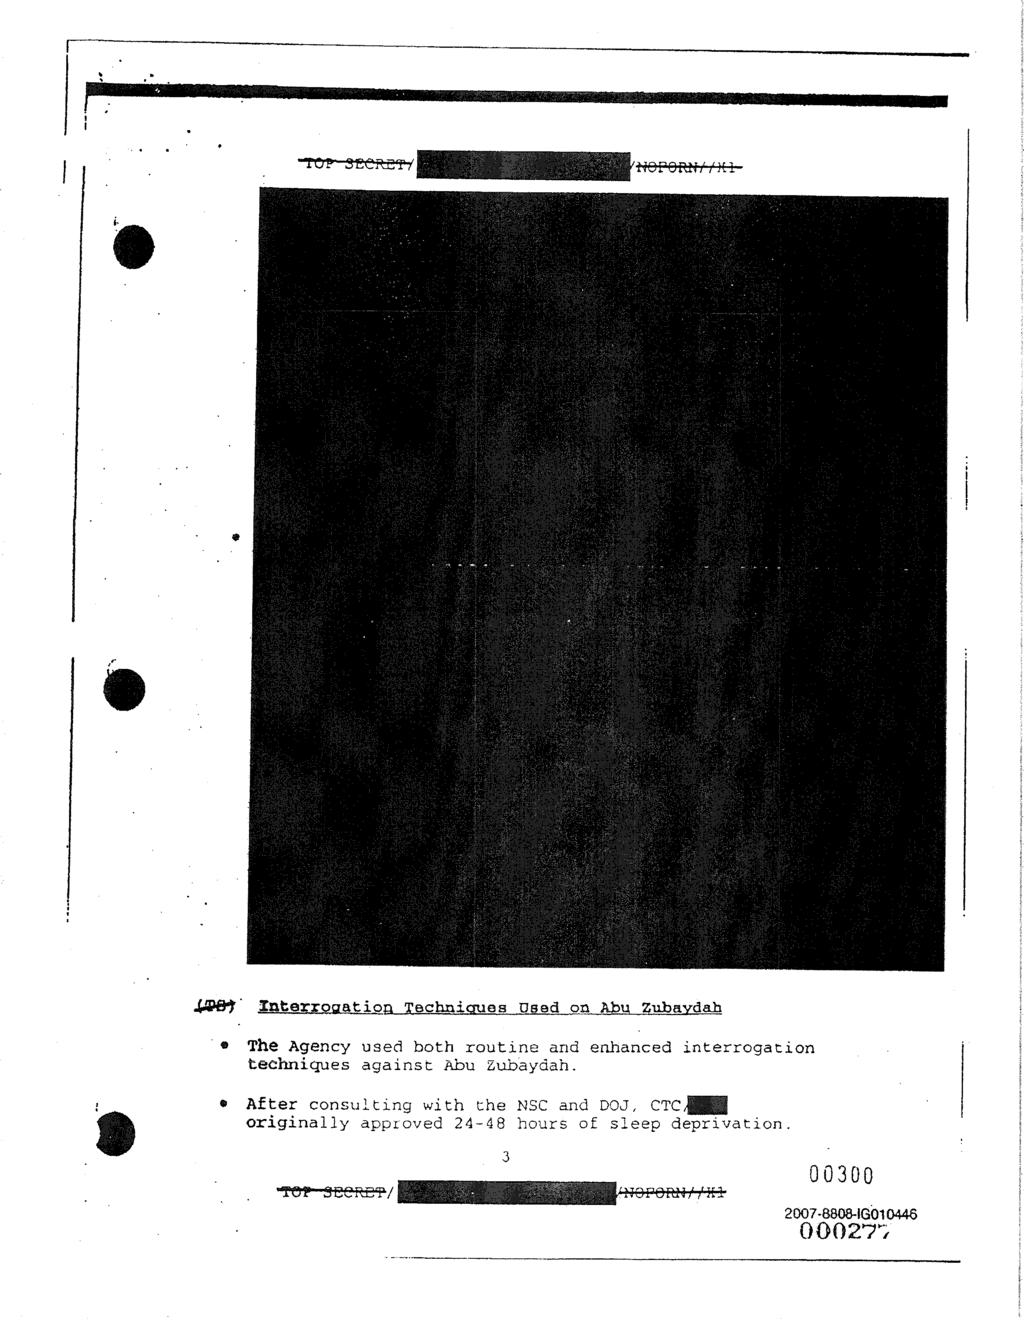 421e/' Interroaation Techniques used on Abu Zubavdah The Agency used both routine and enhanced interrogation techniques against Abu